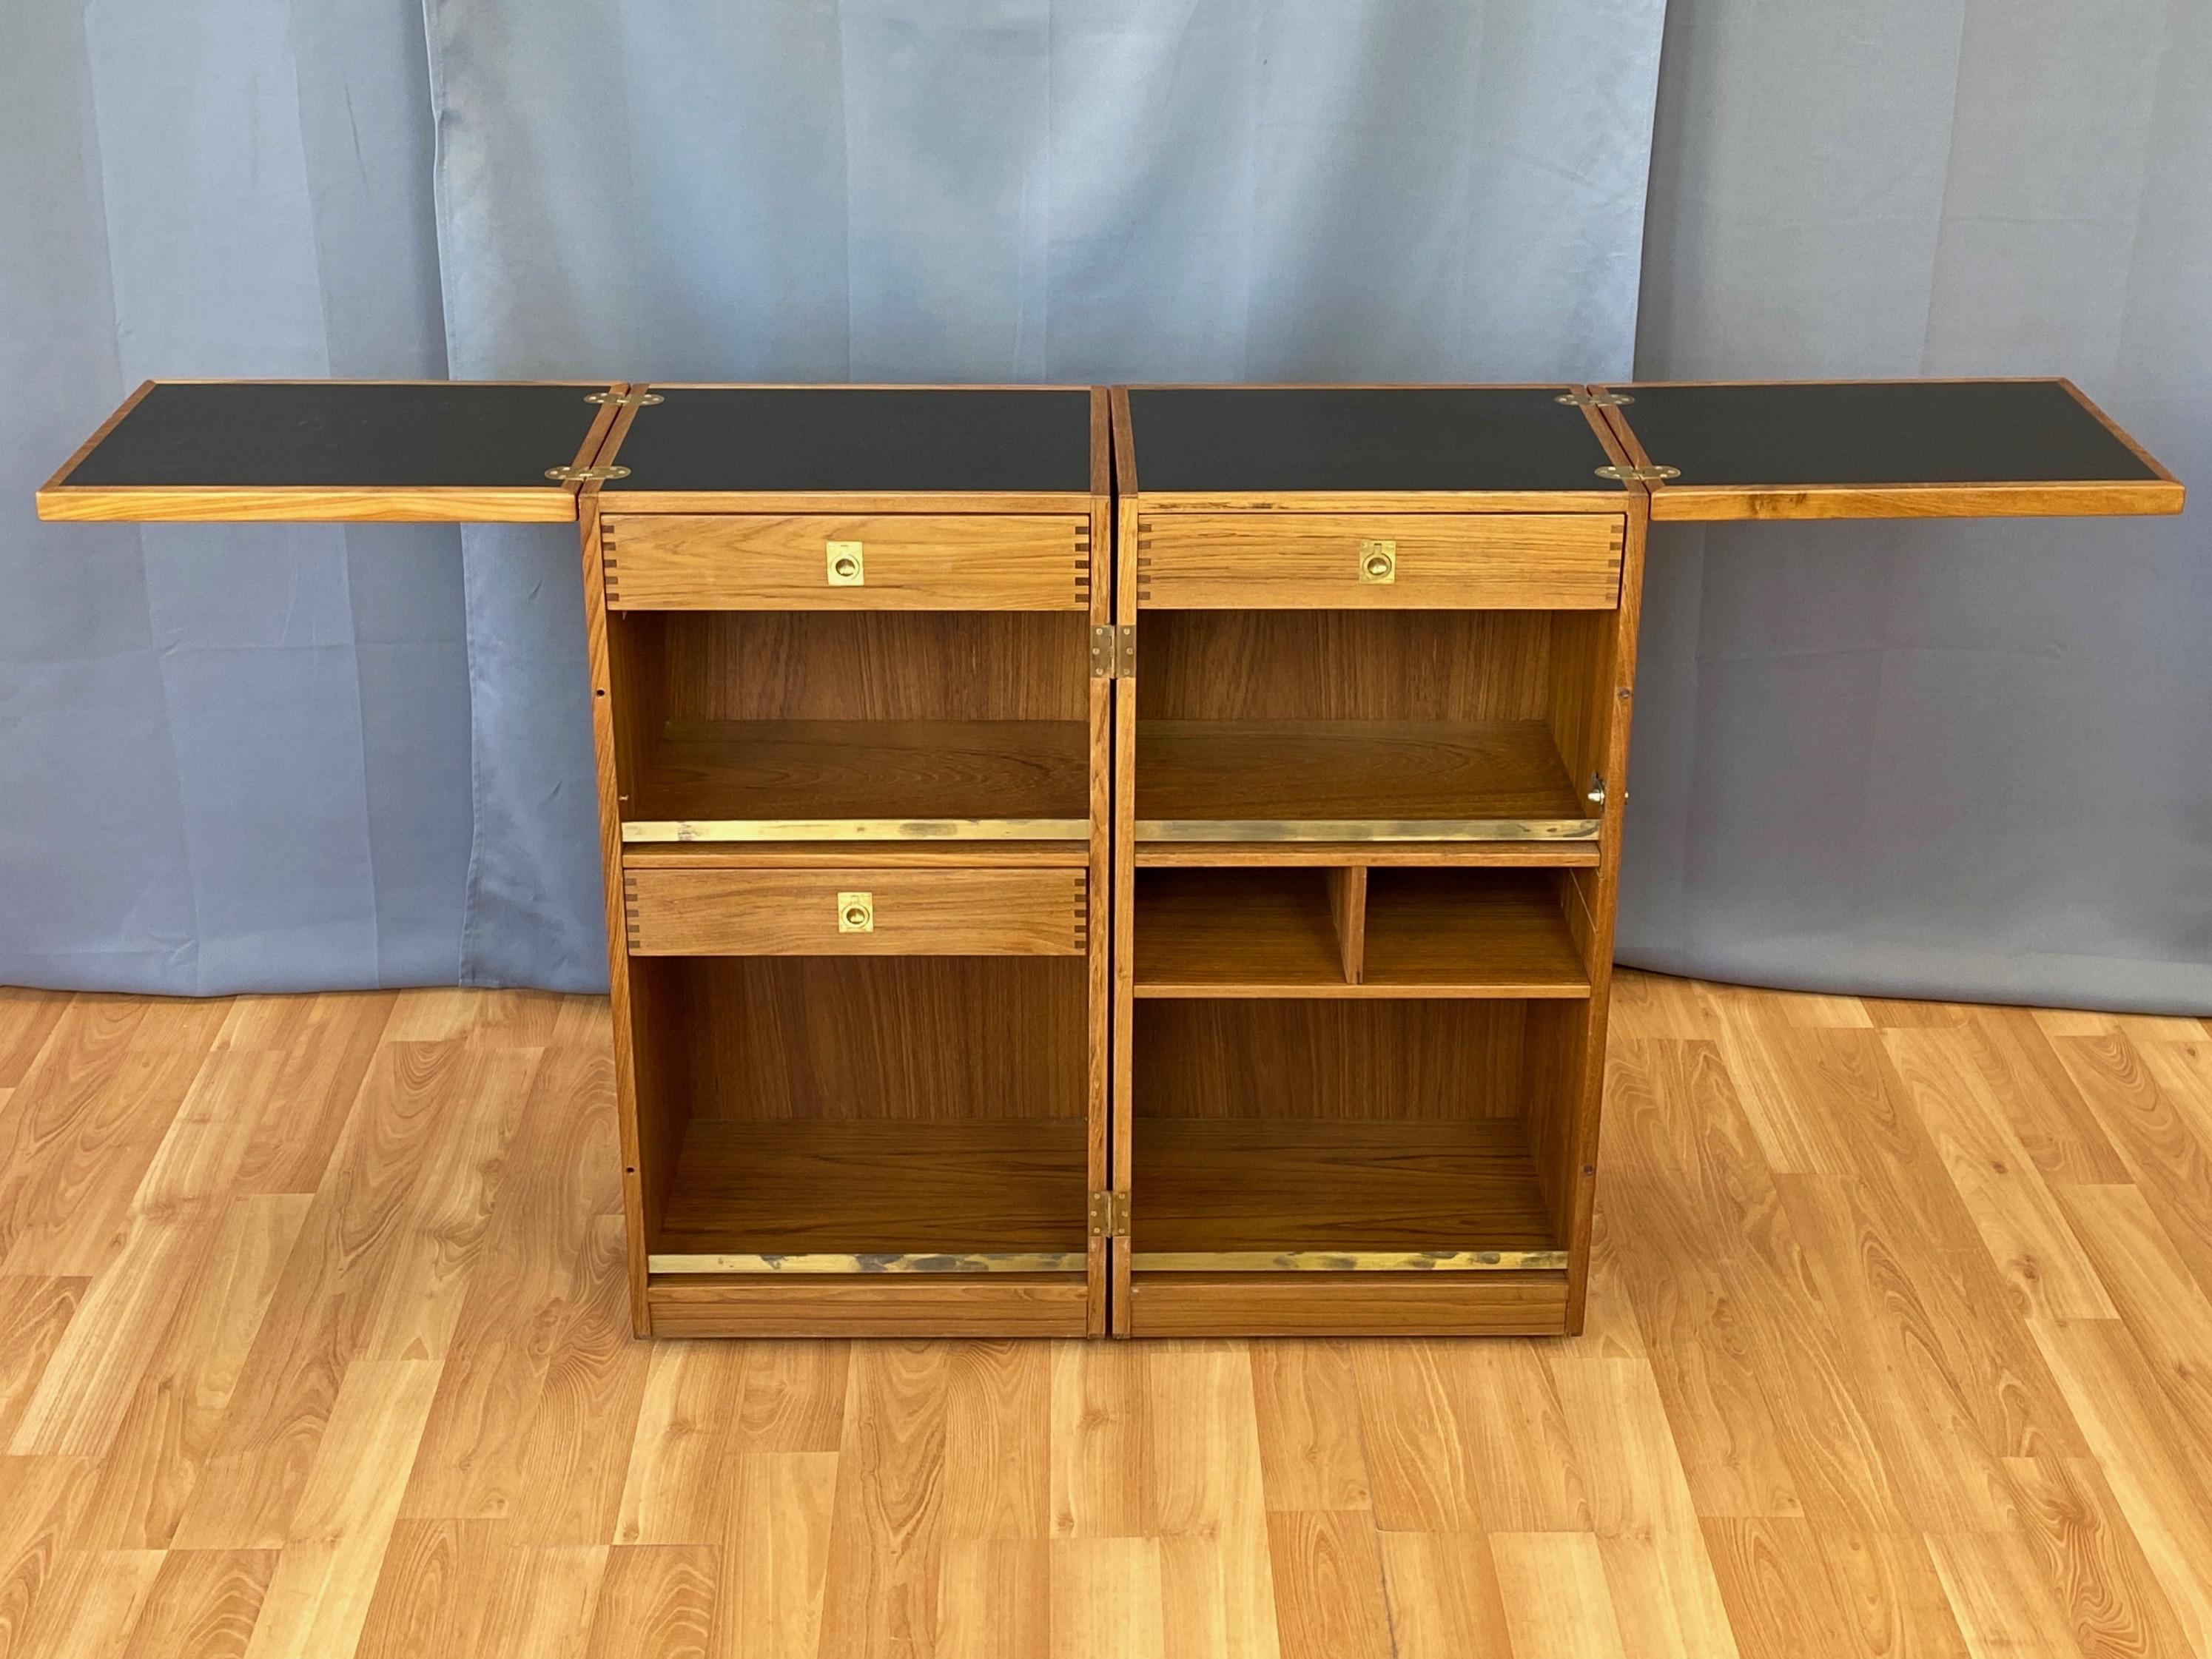 A fantastic 1960s Danish folding and convertible captain’s bar in bookmatched teak by Reno Wahl Iverson for Dyrlund.

Compact enclosed storage cabinet on casters transforms into a tidy dry bar with a spacious fold-out black laminate top supported by